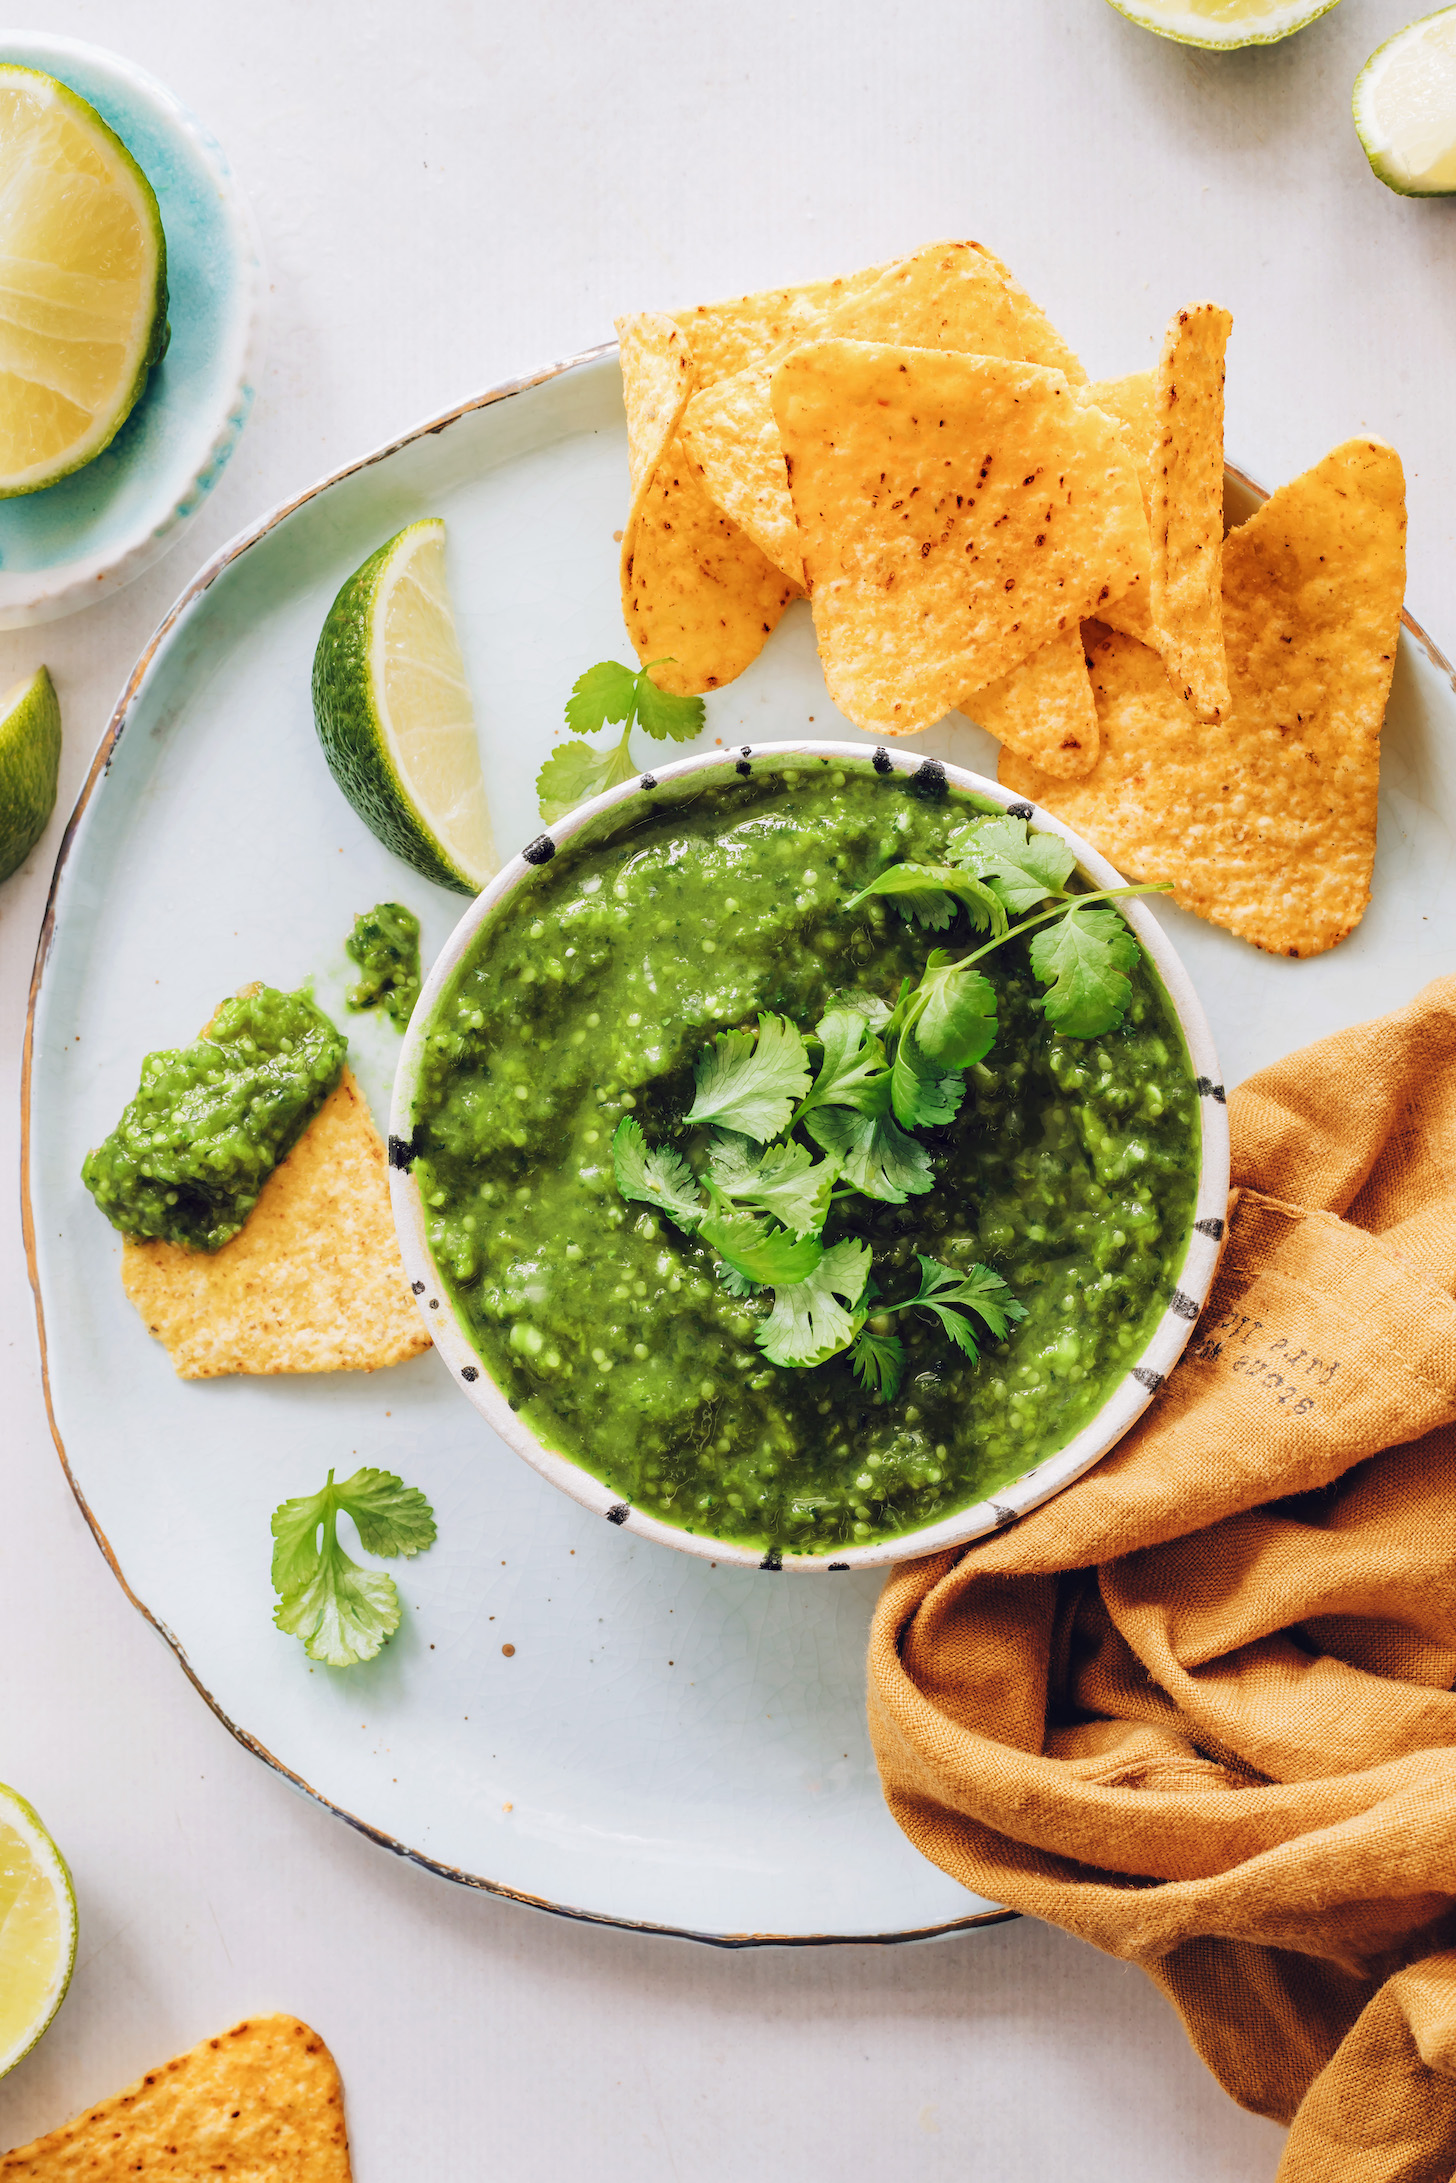 Tortilla chips on a plate next to a bowl of our roasted salsa verde recipe